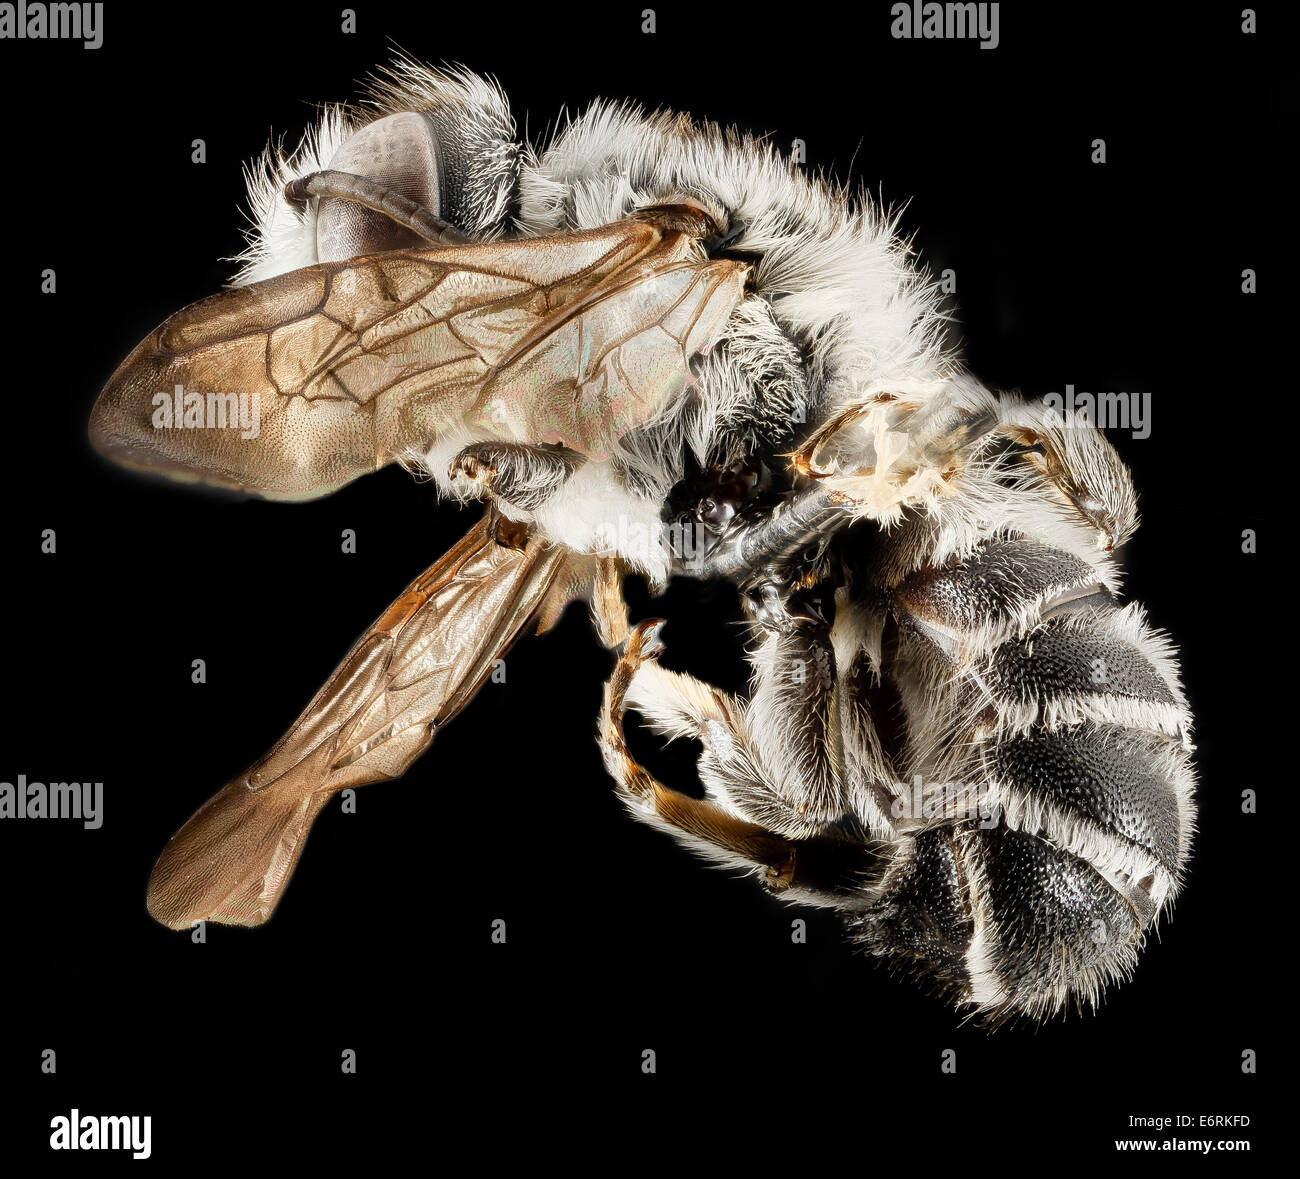 Megachile frugalis, M, Side, Pg County, MD 2014-01-30-112252 ZS PMax 12522701945 o A mysterious species of Megachile that seems  Stock Photo